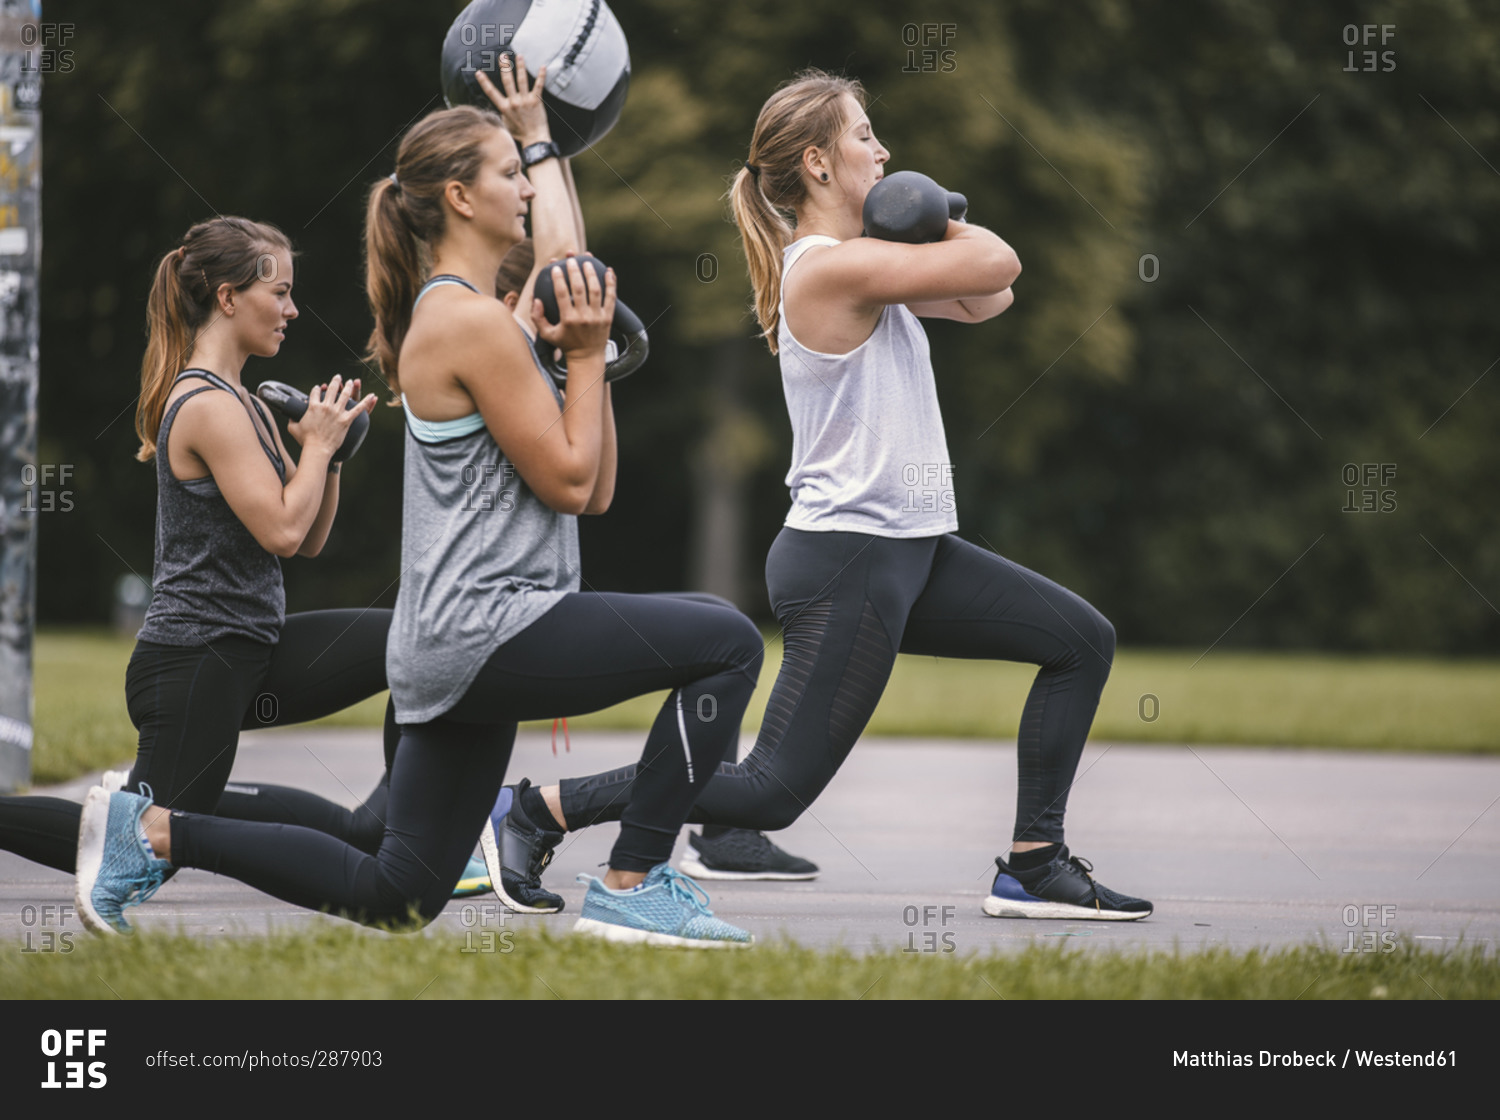 Four women doing lunges during an outdoor boot camp workout